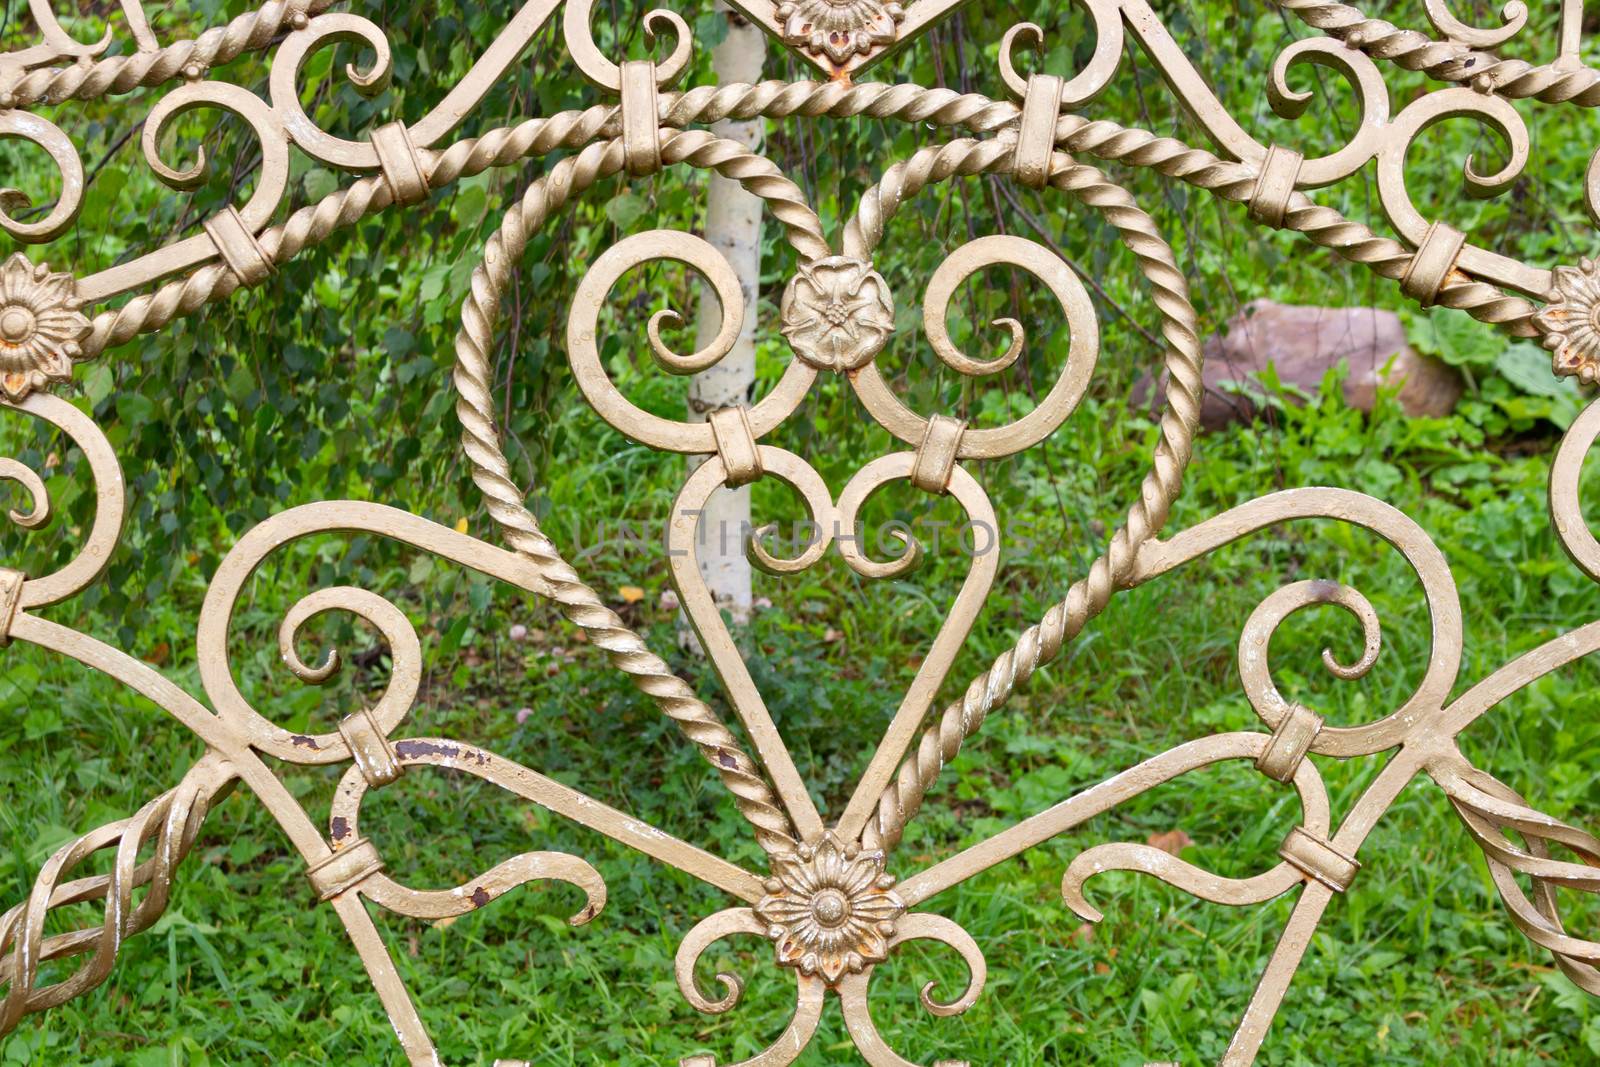 Forged elements on a garden bench in the shape of a heart.Garden wrought iron furniture in the garden.